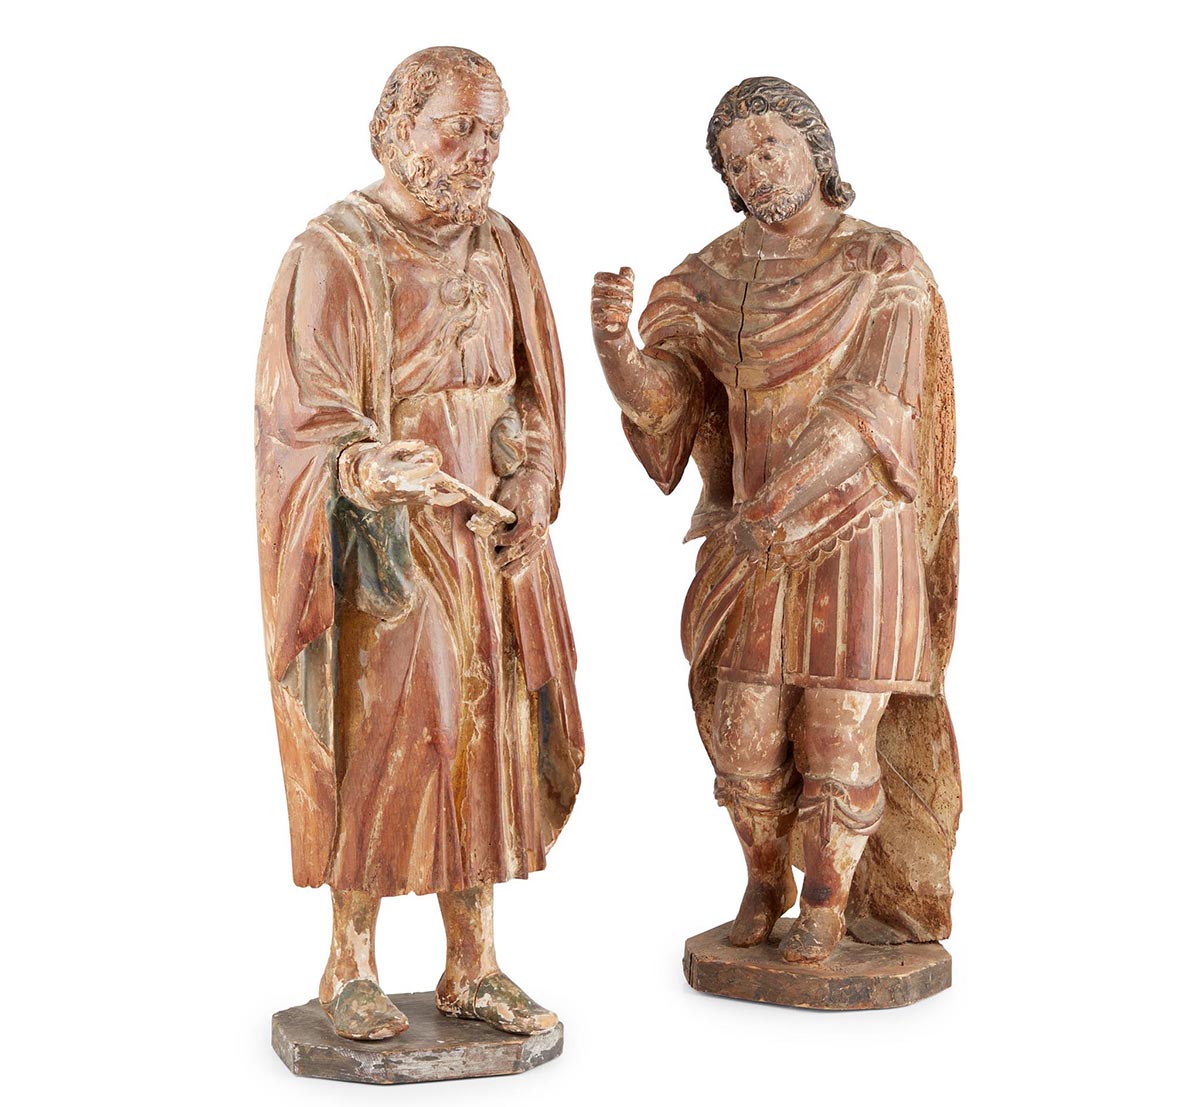 LOT 202 | CARVED DEAL AND POLYCHROME PAINTED FIGURES OF SAINT PETER AND ST. LONGINUS, PROBABLY ITALIAN | 18TH CENTURY £800 - £1,200 + fees